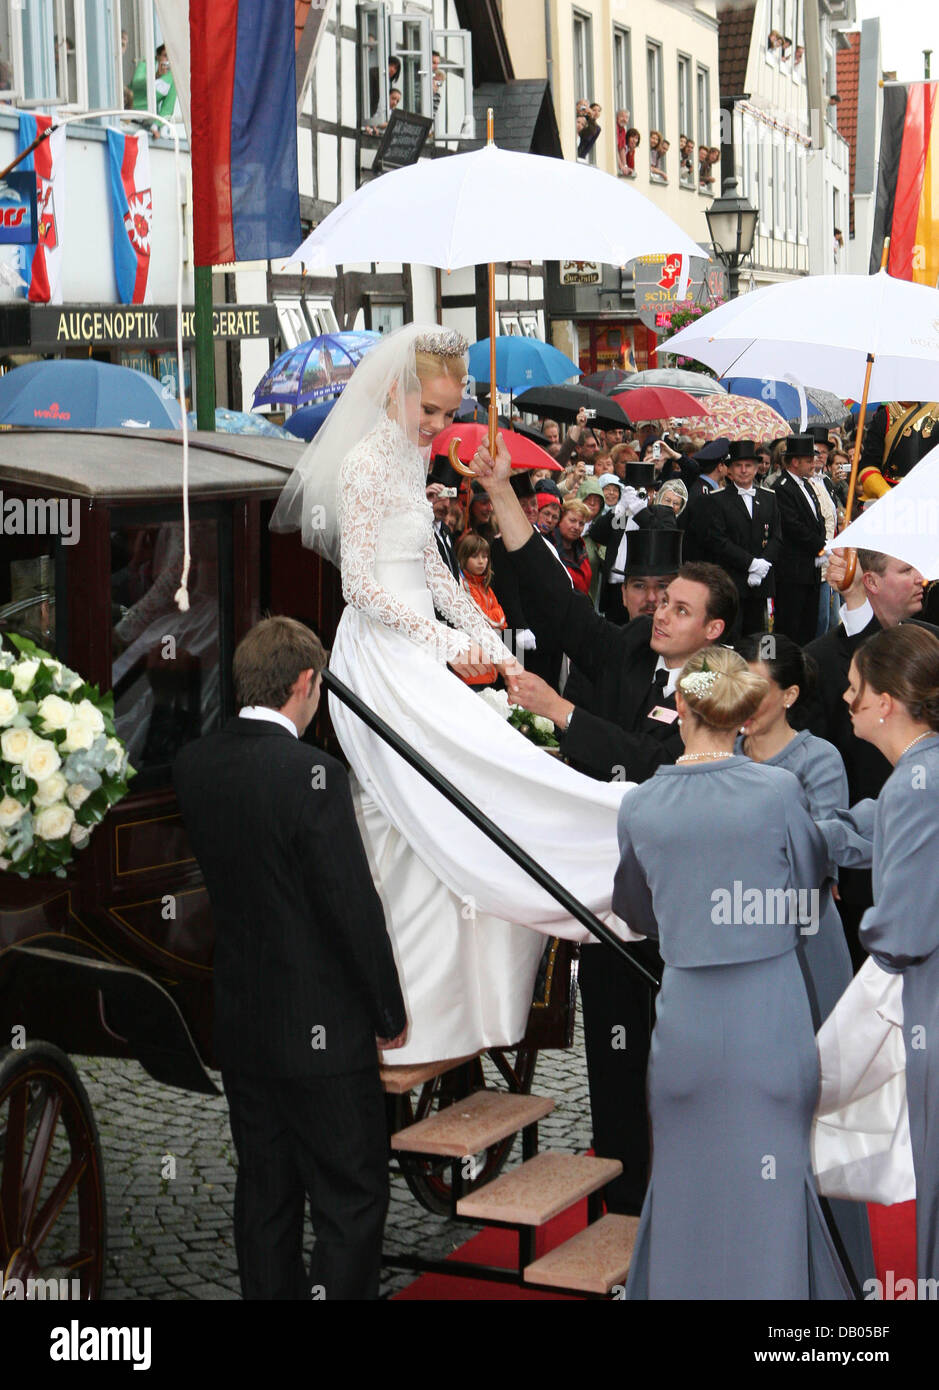 Bride Nadja Anna, Princess of Schaumburg-Lippe, leaves a horse-drawn carriage before her church wedding in Bueckeburg, Germany, 30 June 2007. Politicians, royals and celebrities were among the 750 invited guests. Photo: Albert Nieboer (NETHERLANDS OUT) Stock Photo